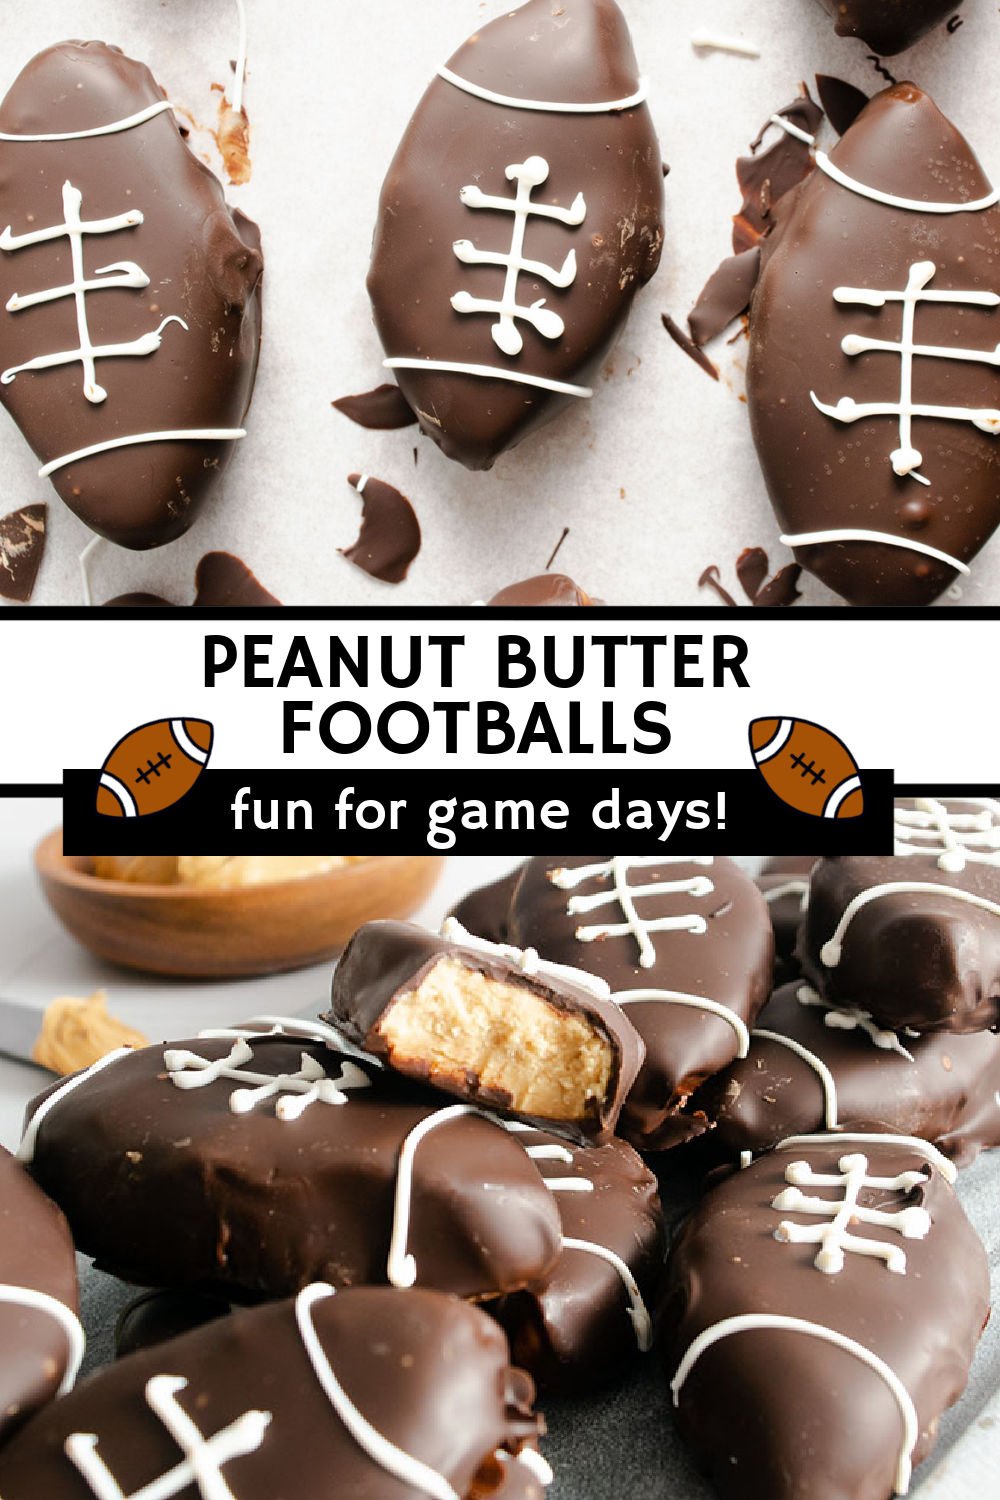 Chocolate Covered Peanut Butter Footballs are a fun game day treat. Creamy peanut butter shaped footballs dipped in dark chocolate and topped with white chocolate "laces", these easy footballs are the perfect tailgate dessert! | www.persnicketyplates.com